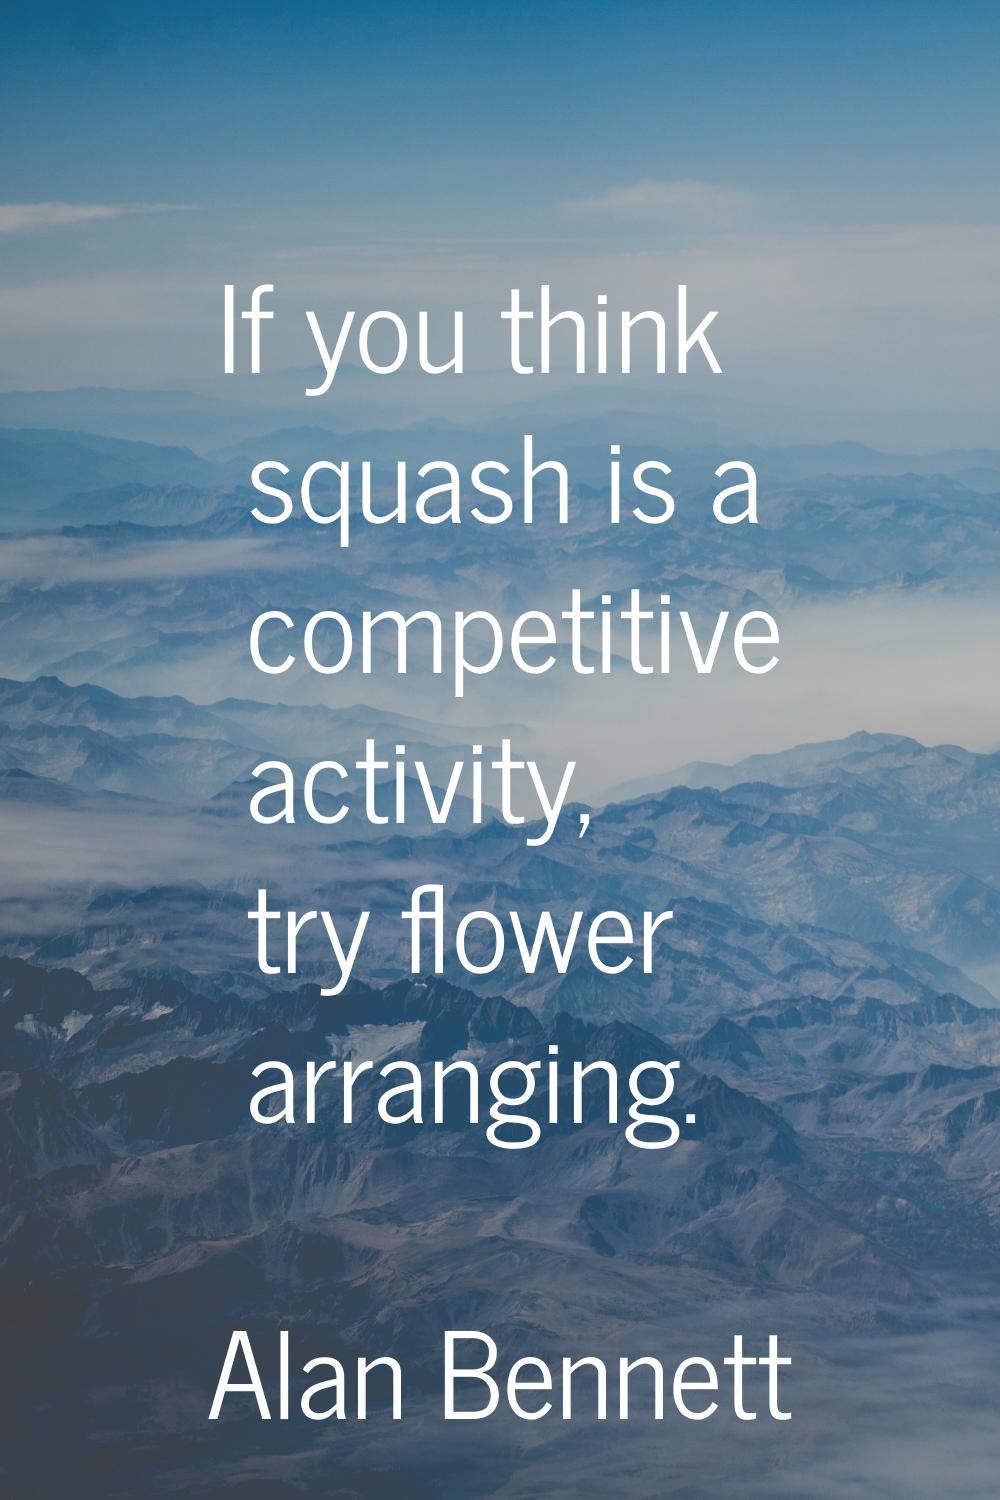 If you think squash is a competitive activity, try flower arranging.